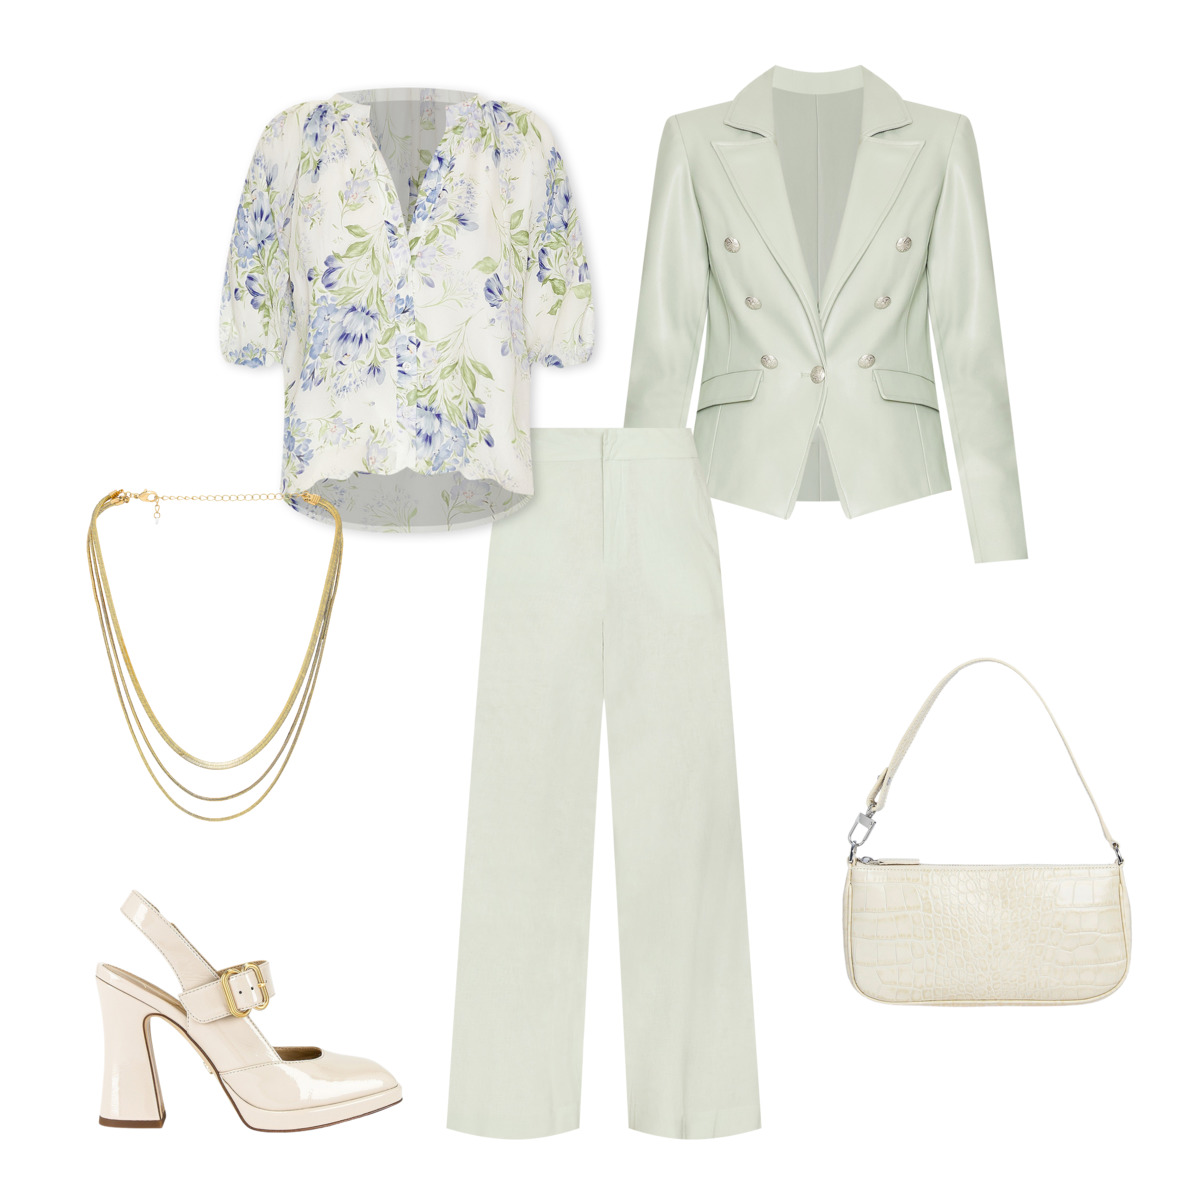 Revolve outfit featuring off-white blazer, off-white dress slacks, floral blouse, gold three strand necklack, off-white purse and white high heel Mary Jane Pumps. Outfit for Shoptalk style guide powered by Stylitics